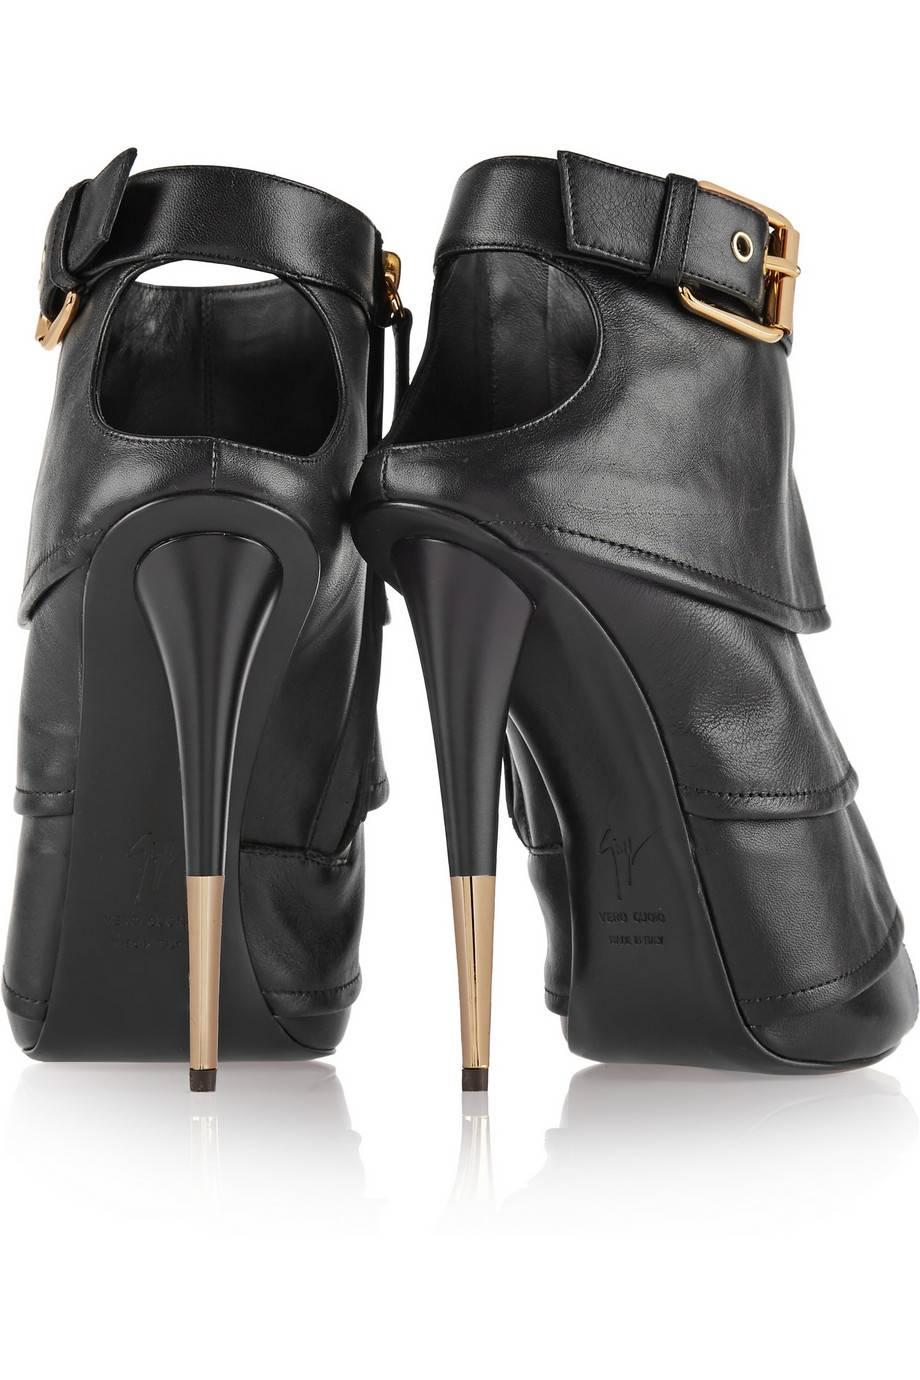 Giuseppe Zanotti Brand New Black Leather Ruffle Gold Stiletto Heels Ankle Bootie In New Condition In Chicago, IL